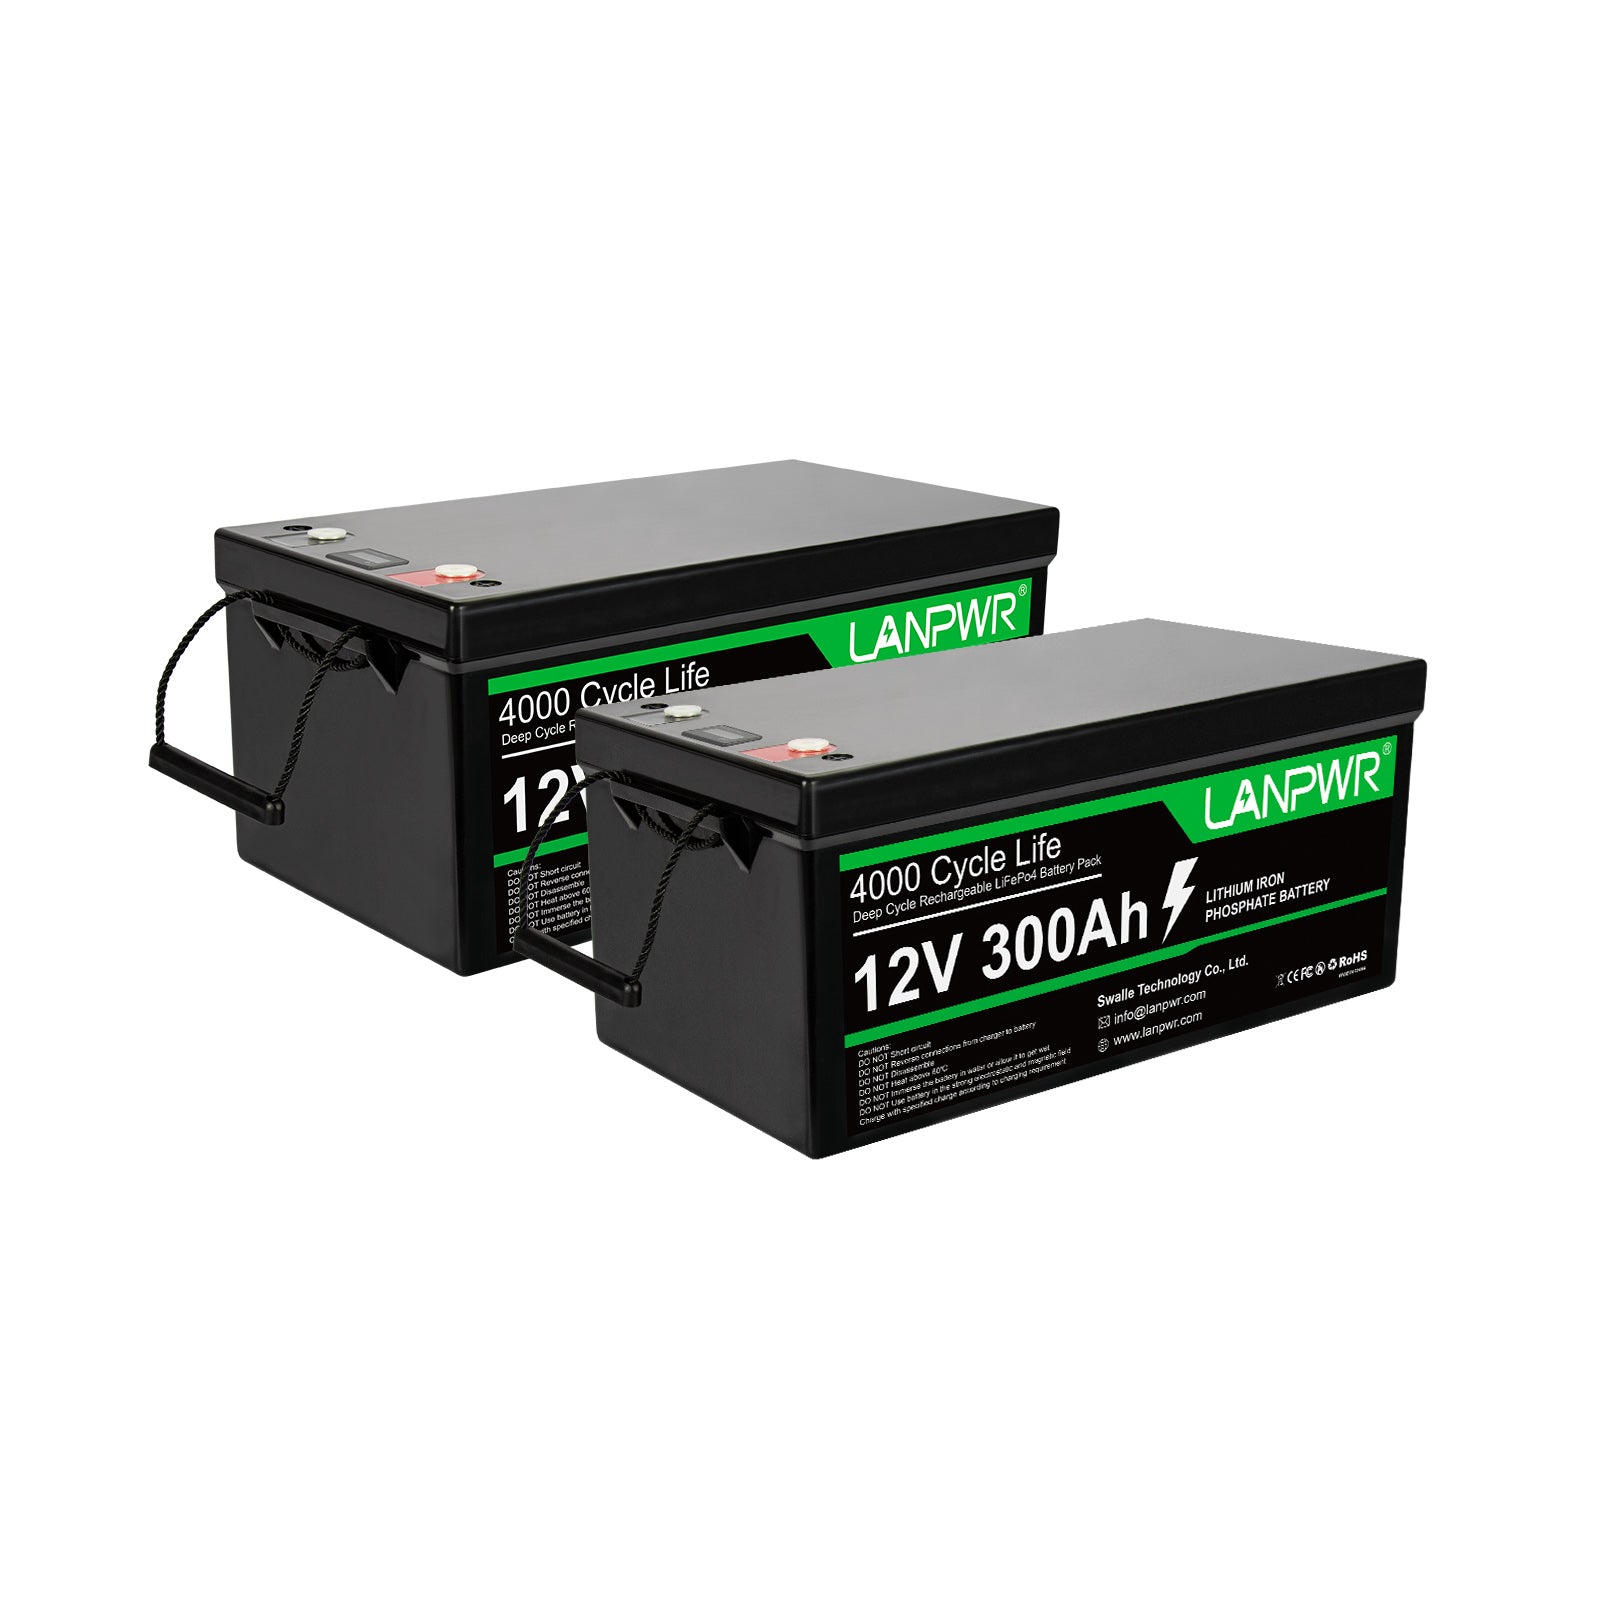 LANPWR 12V 300Ah Lithium Battery LiFePO4 Battery Max. Load Power 2560W for Camping, Motorhome, Solar Home System, Solar Trailer, Golf Carts, Boat and Off-Grid System